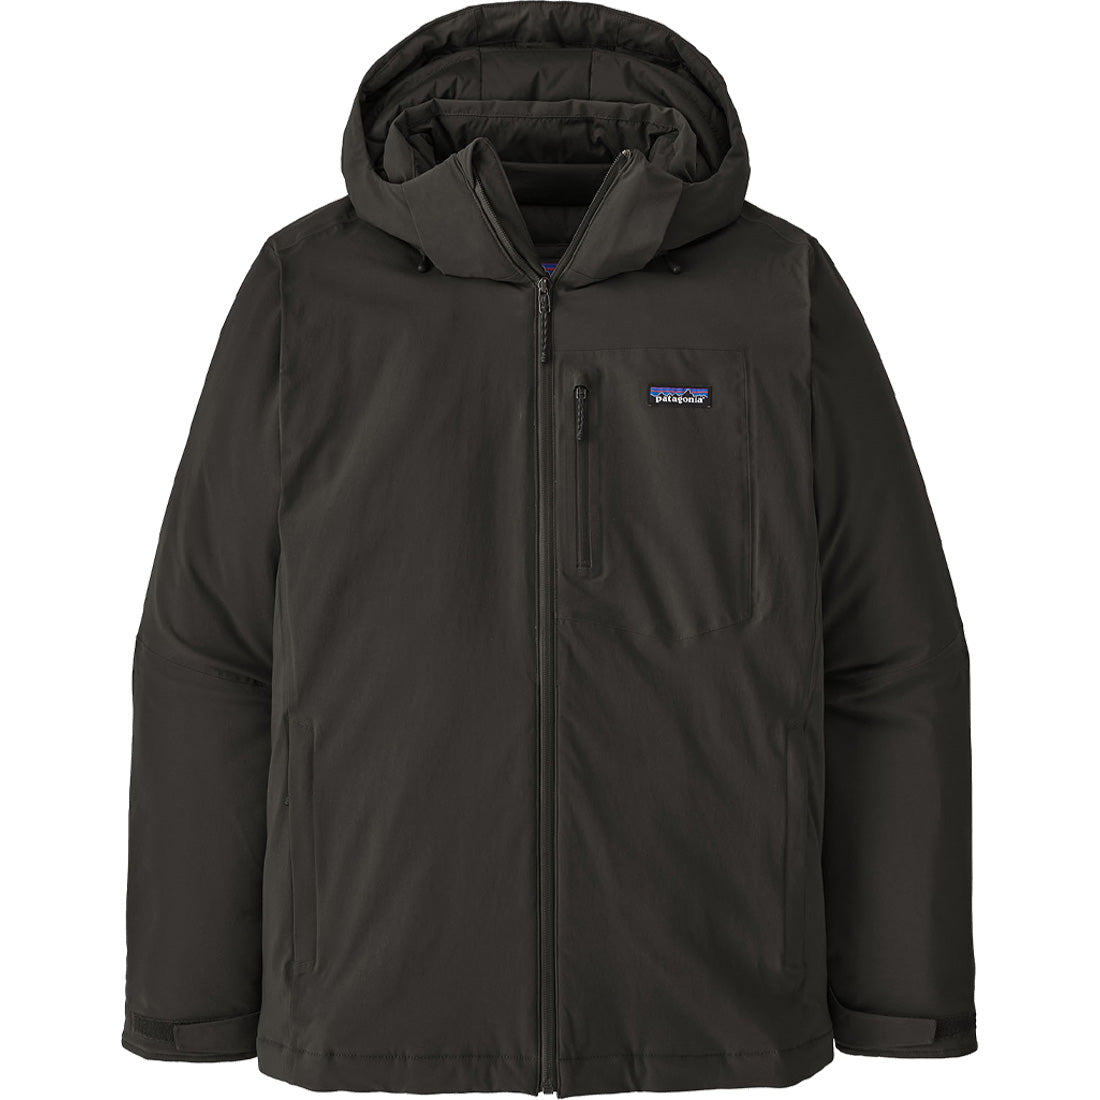 Patagonia Insulated Quandary Jacket - Men's